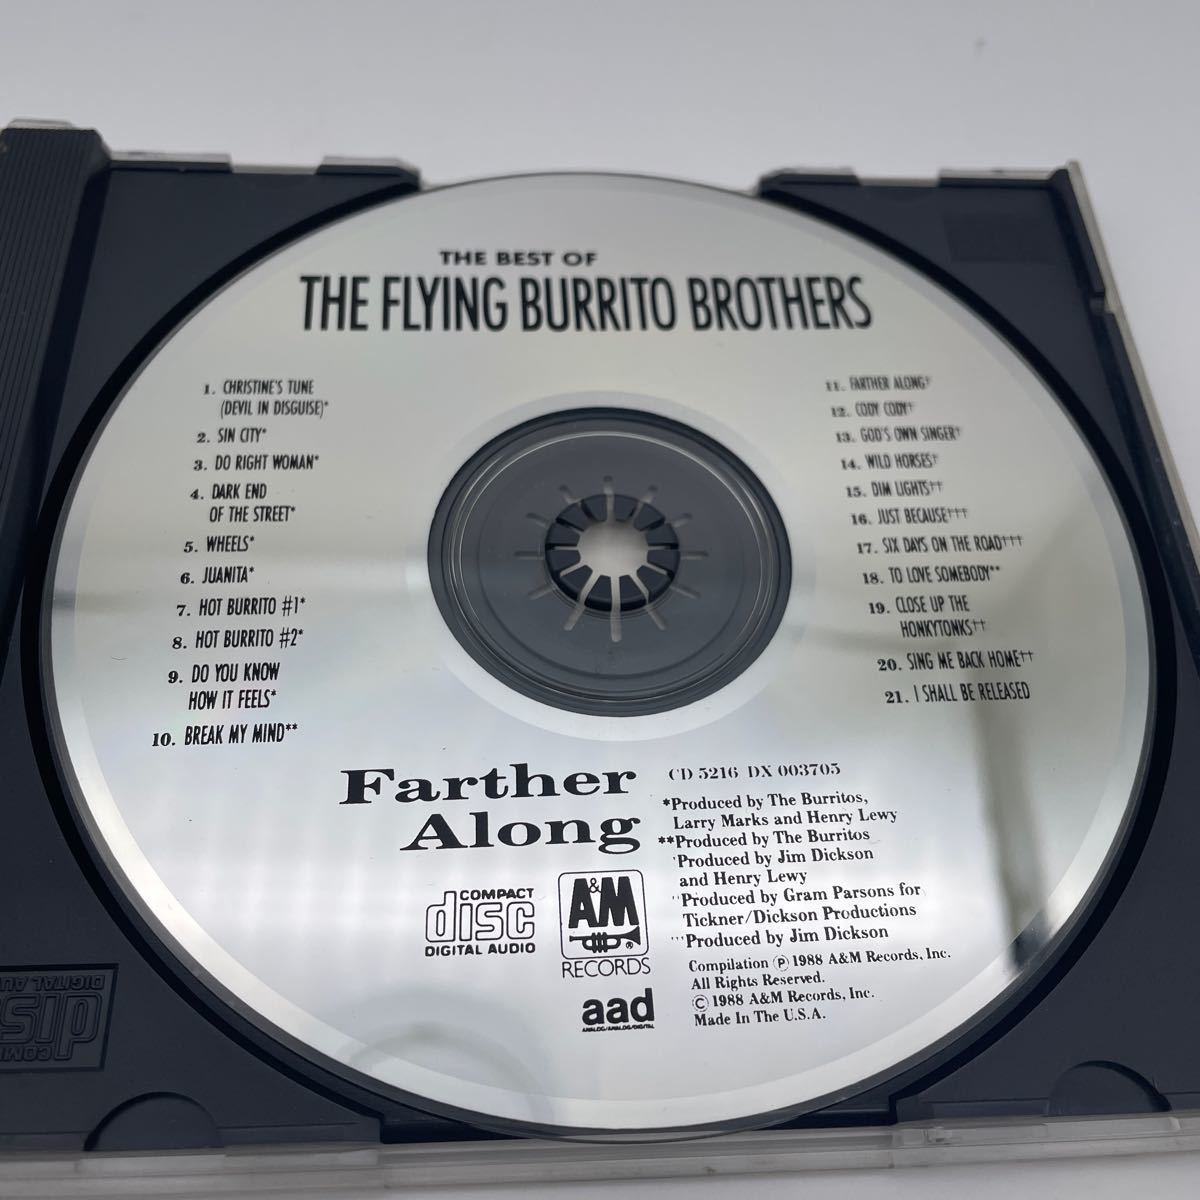 【US盤】The Flying Burrito Brothers/CD/Farther Along/フライング・ブリトー・ブラザーズ_画像4